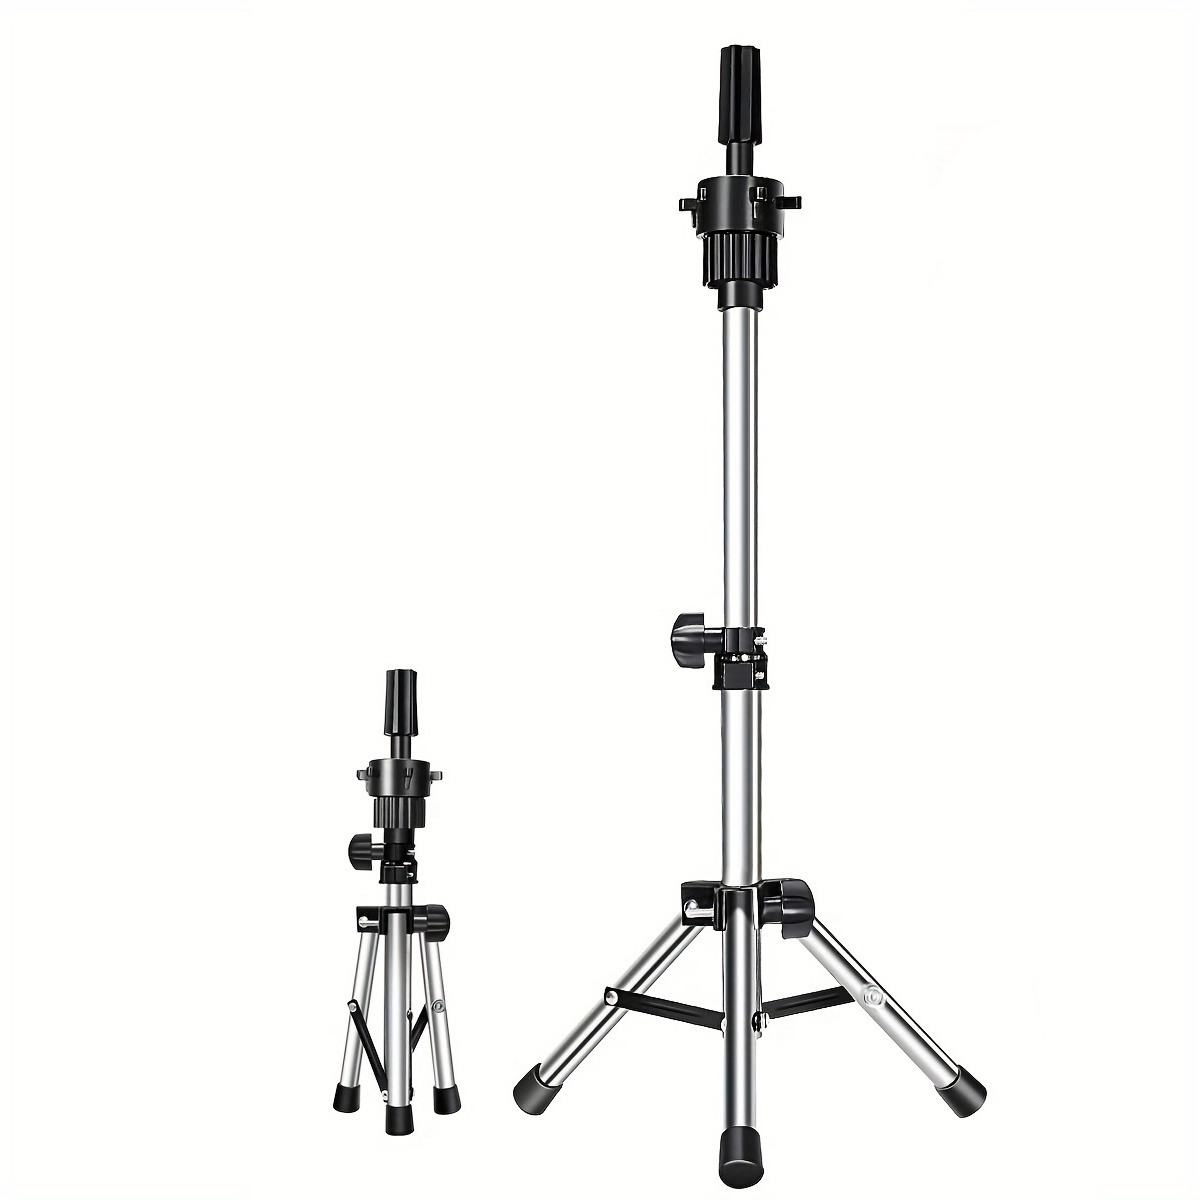 Wig Tripod with Non-Slip Base Adjustable Mannequin Head Stand with Hook Heavy Duty Manikin Head Holder for Cosmetologist Salons Hairdressing Training